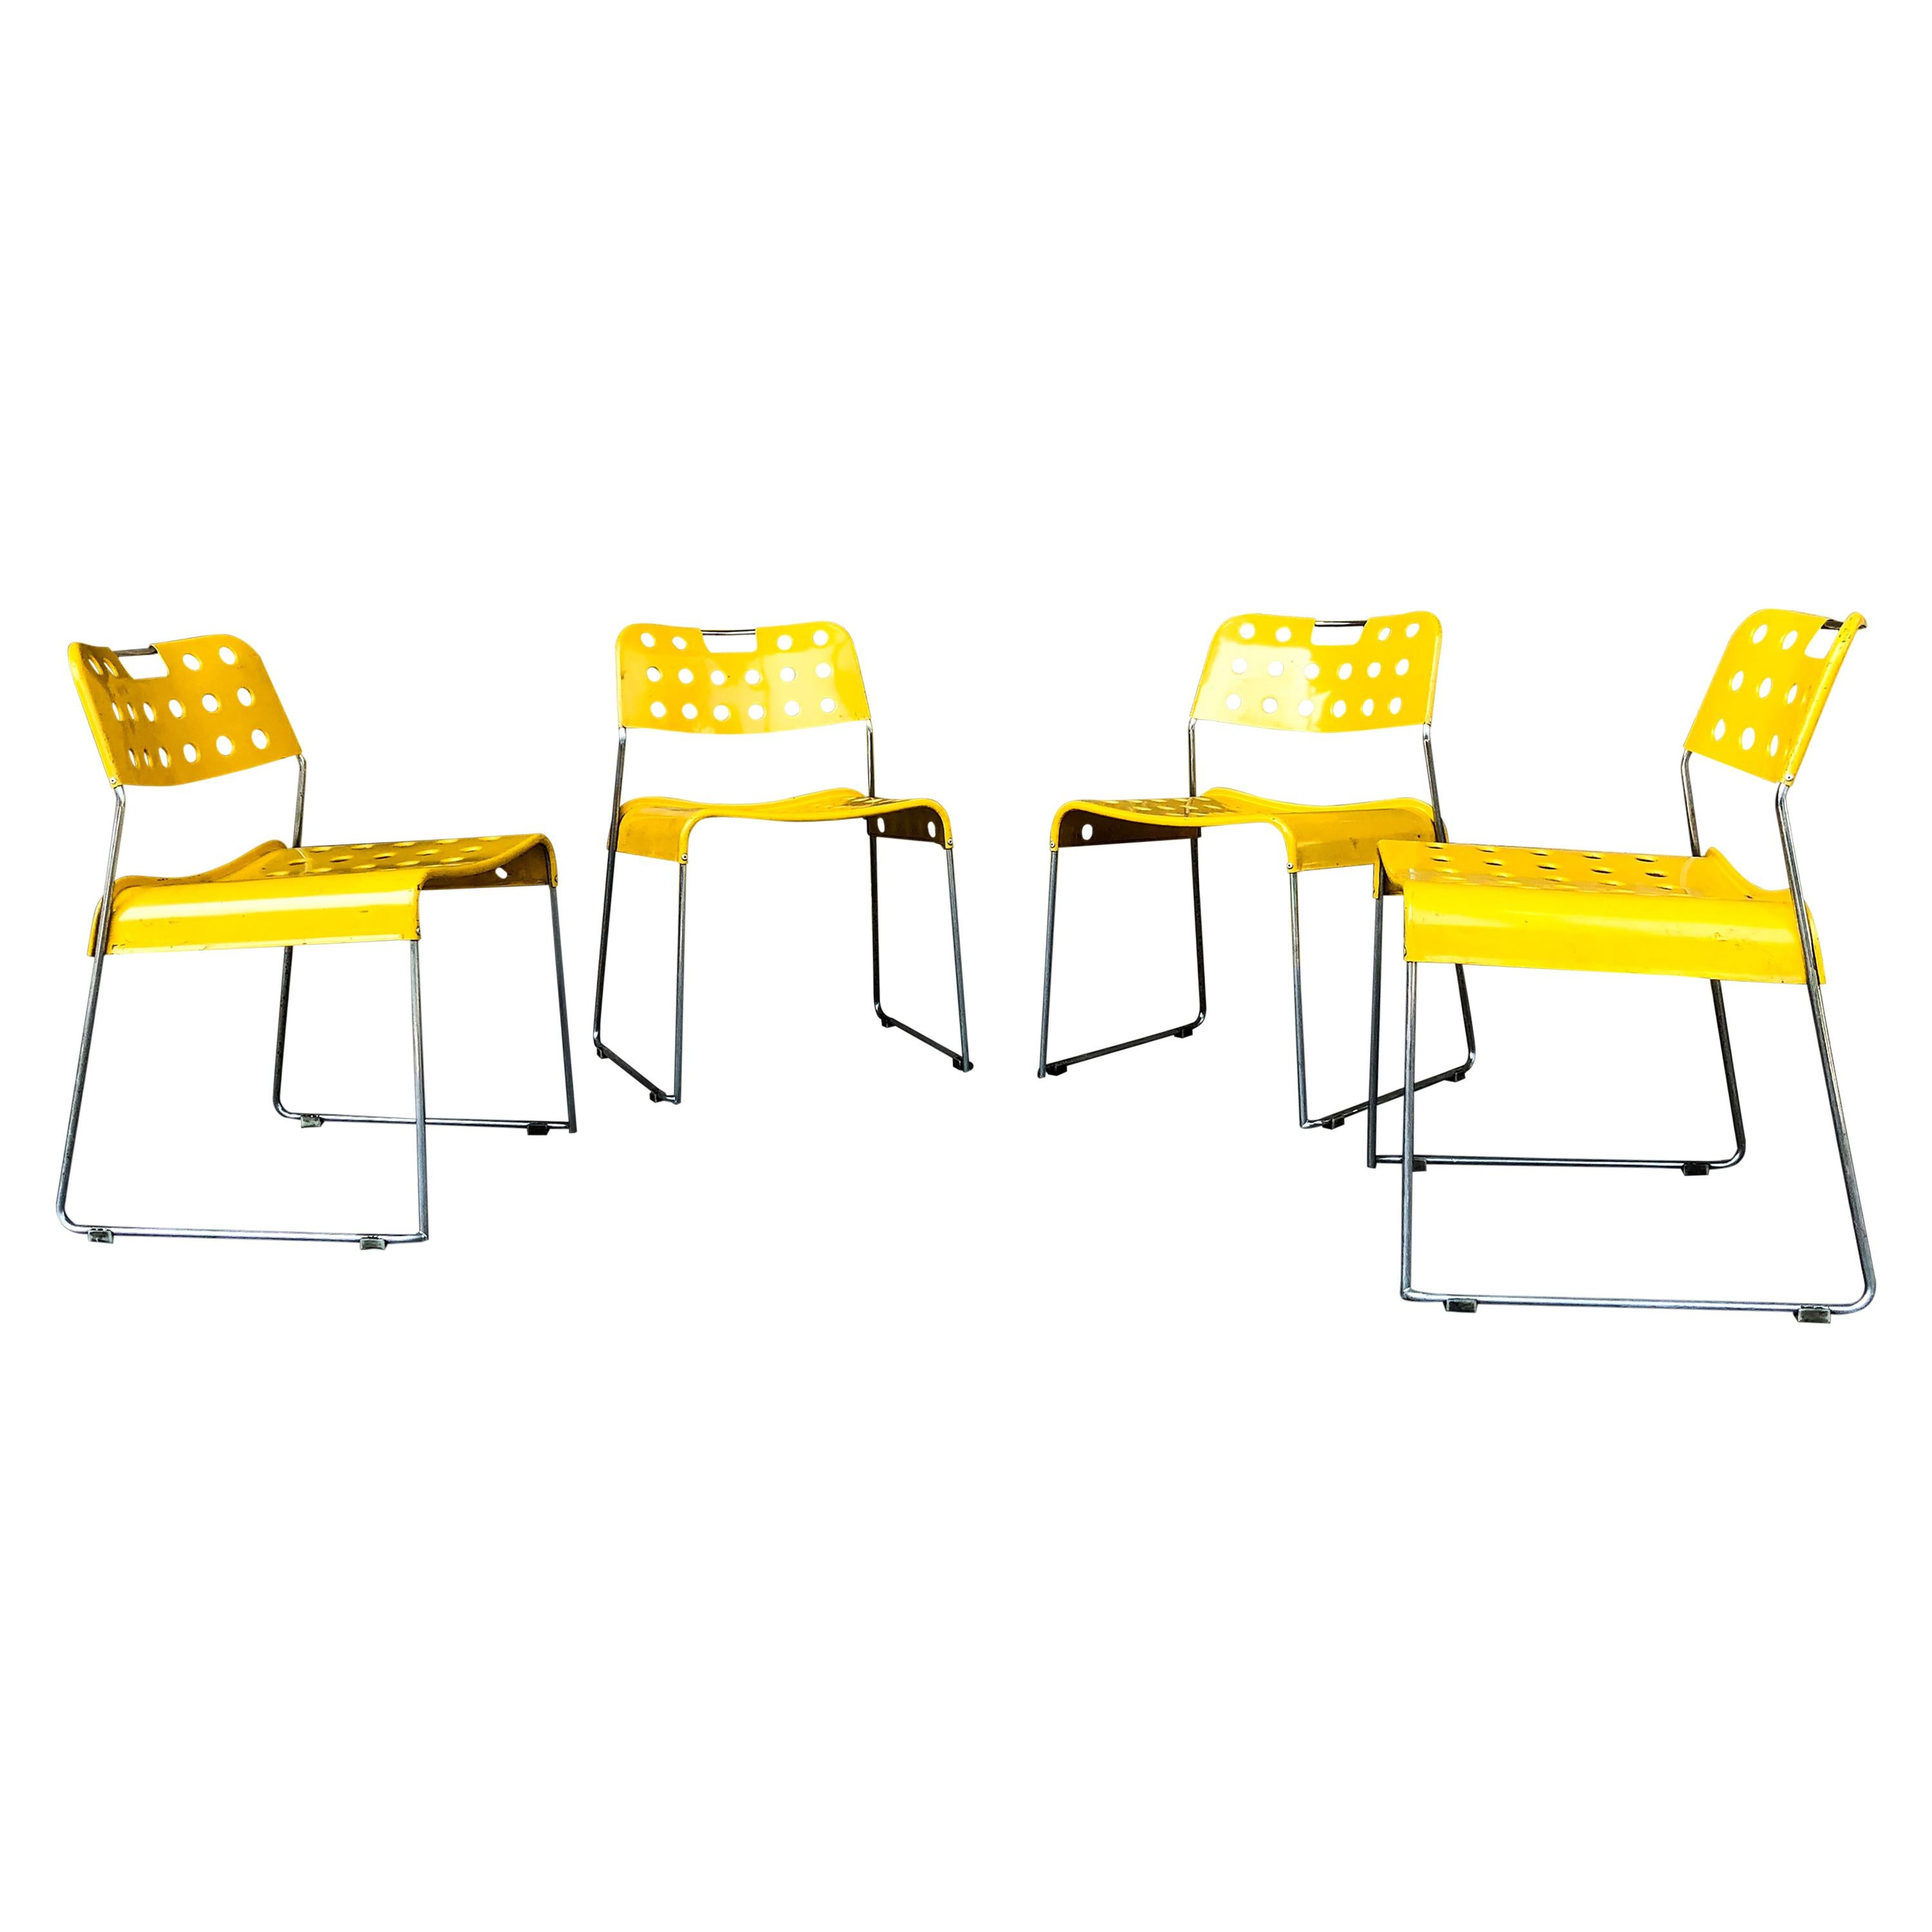 Rodney Kinsman Space Age Yellow Omstak Chair for Bieffeplast, 1971, Set of 18 For Sale 5